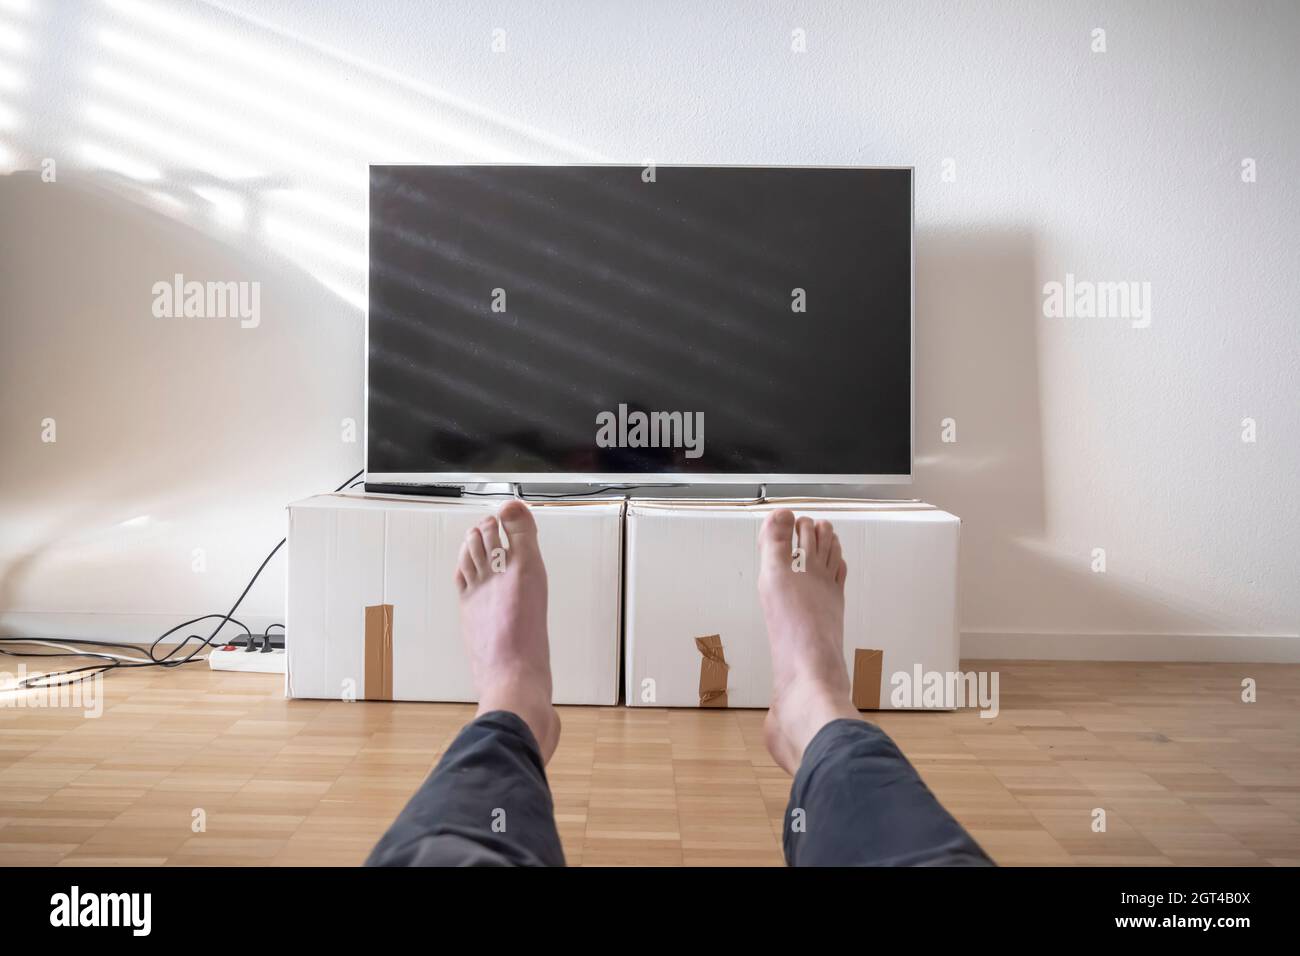 Television On Cardboard Box In Living Room And Men Legs In Switzerland  Stock Photo - Alamy